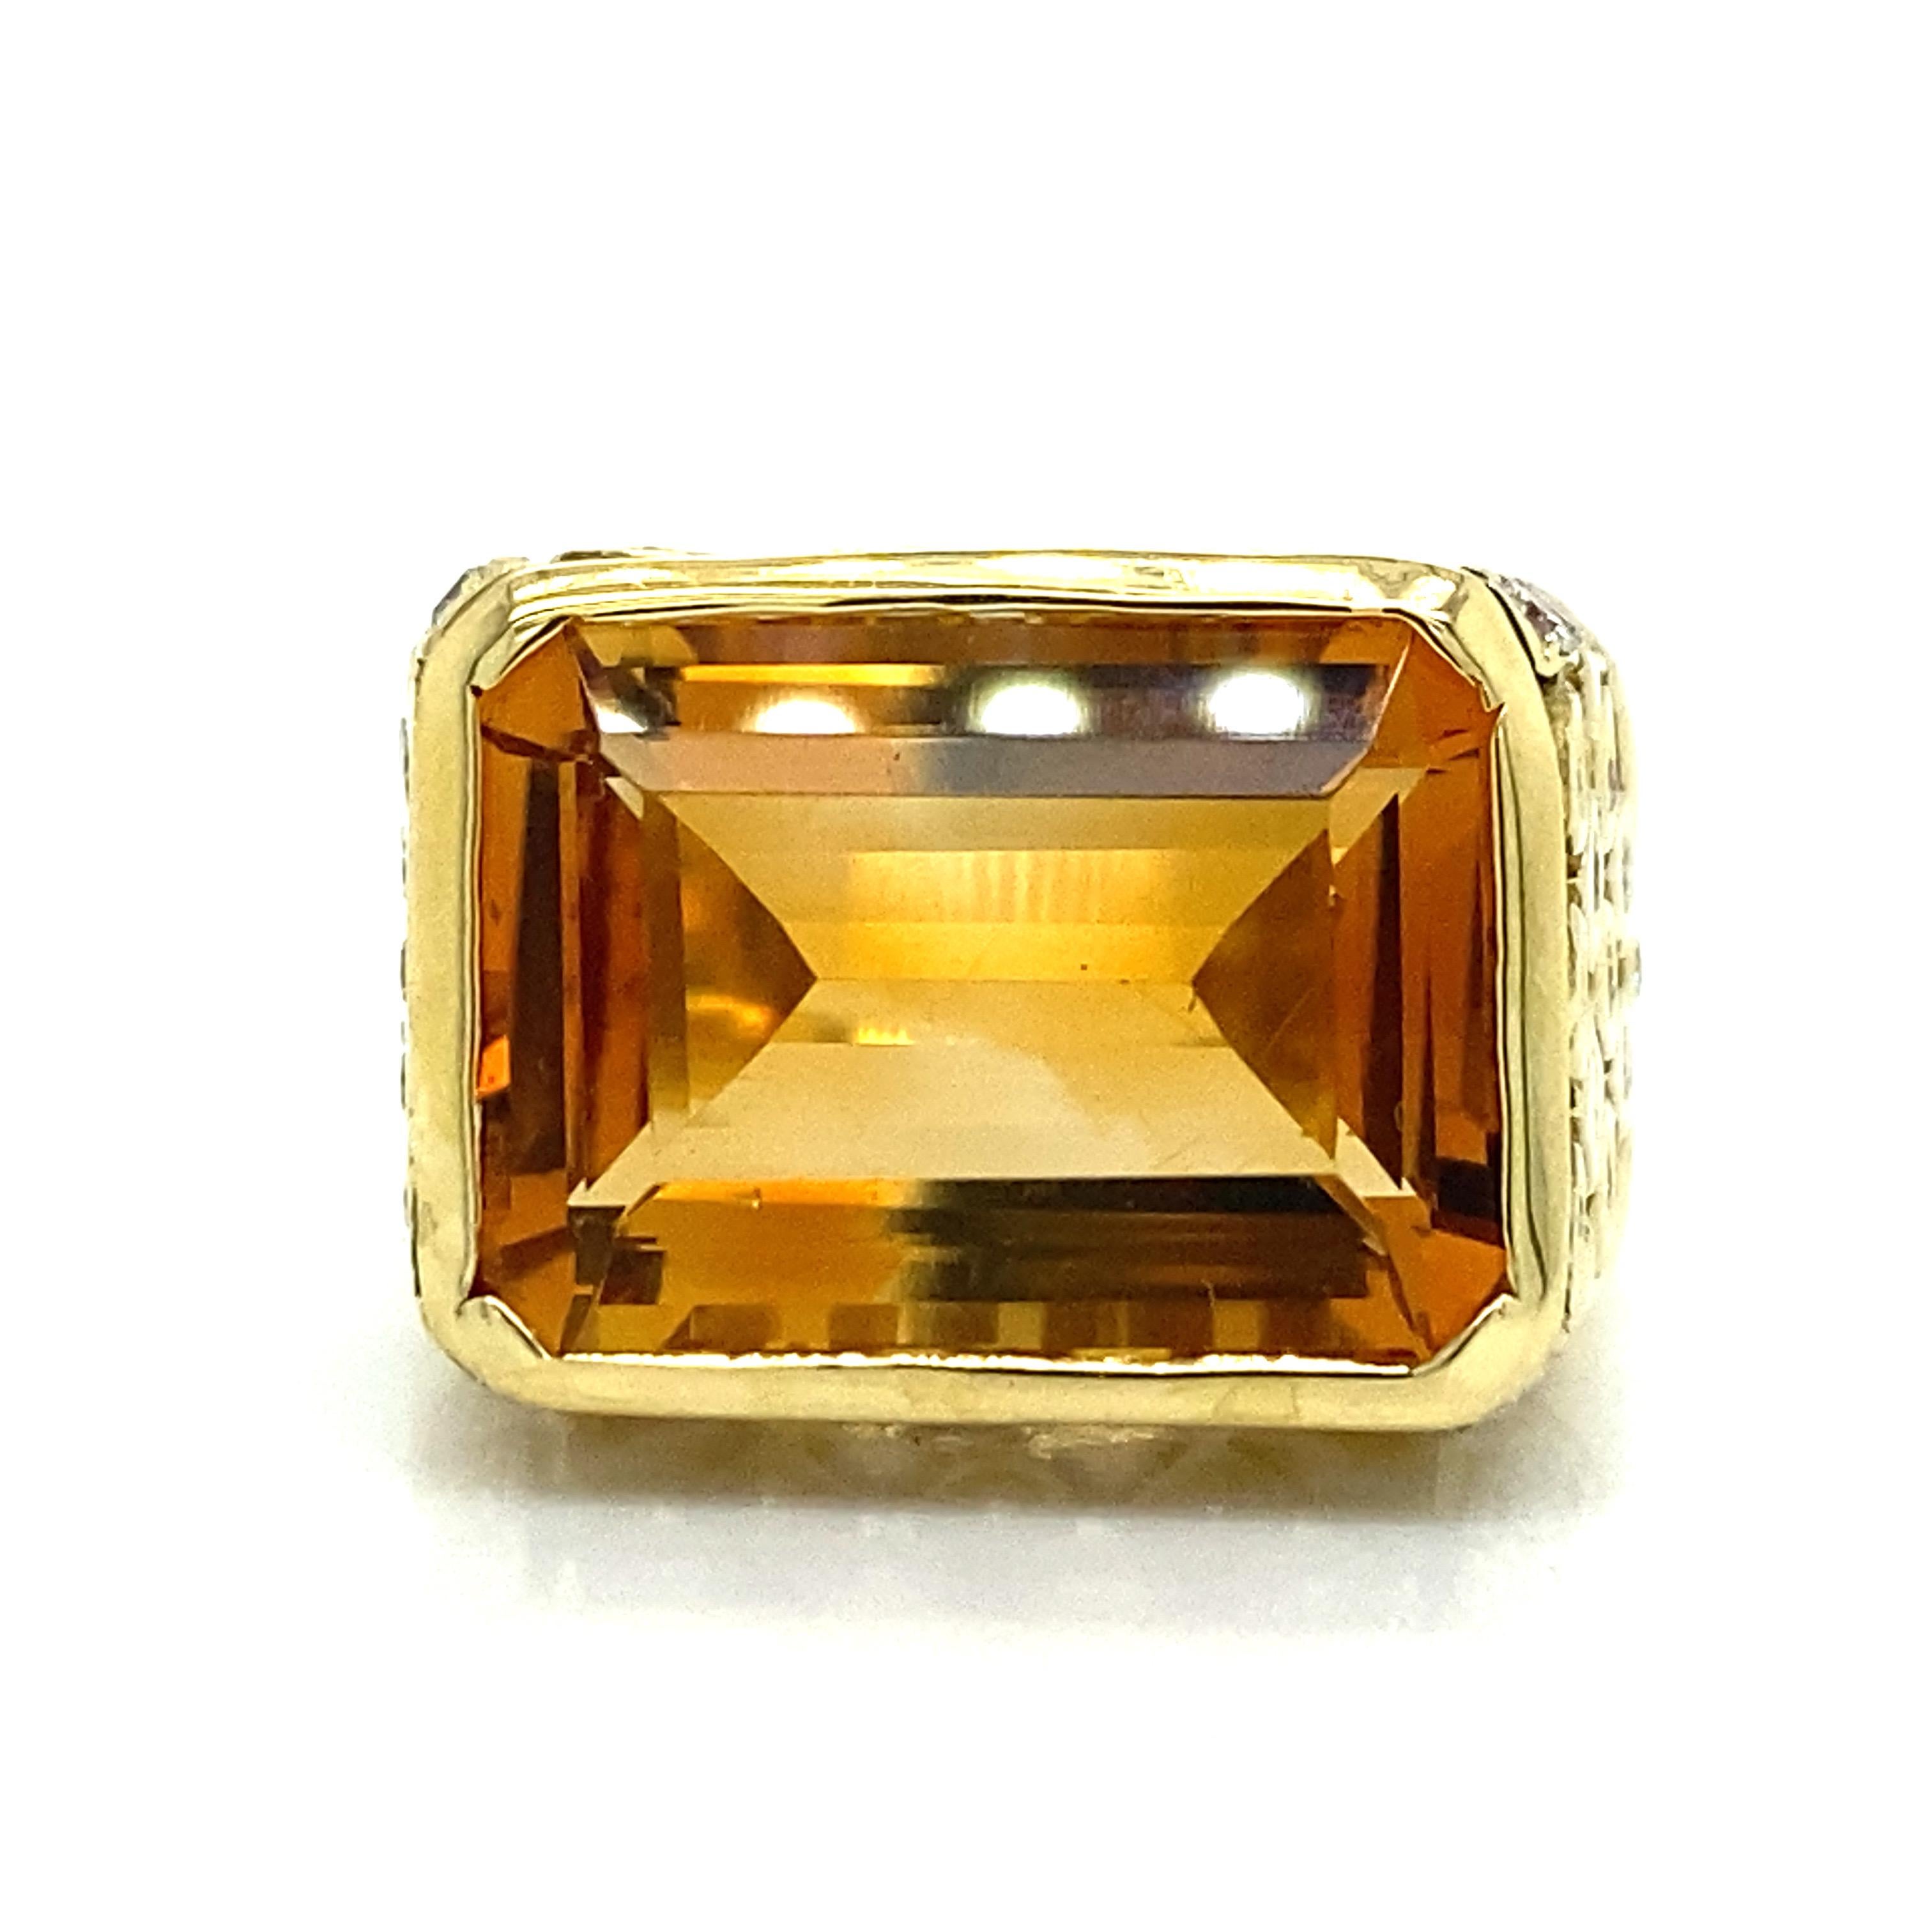 Seidengang Topaz Diamond Signet Ring in 18K Yellow Gold.  A rectangular Topaz weighing 14 carats is expertly Bezel set with Round Brilliant Cut Diamonds weighing 1.03 carat total weight G-H in color and VS in clarity are expertly set.  The Ring